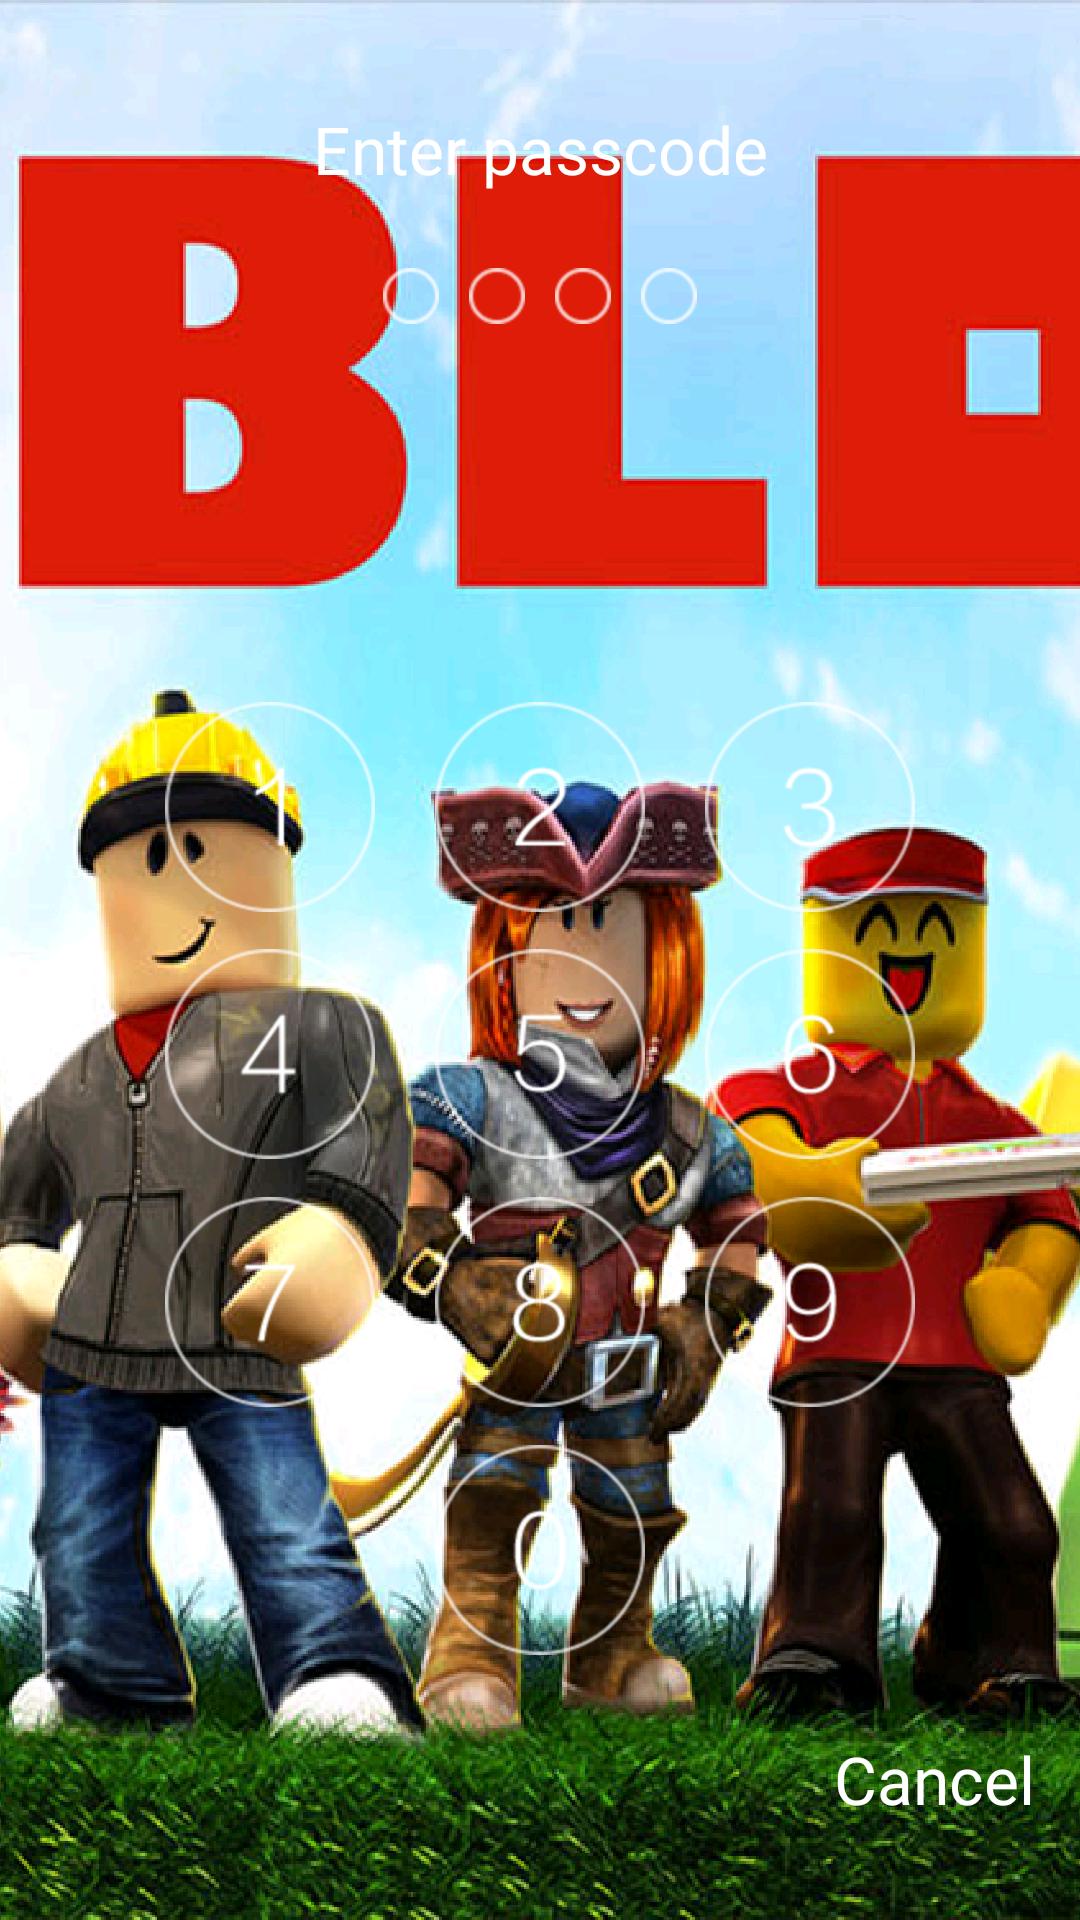 Roblox Lock Screen With Hd Wallpapers For Android Apk Download - lockscreen free roblox wallpaper